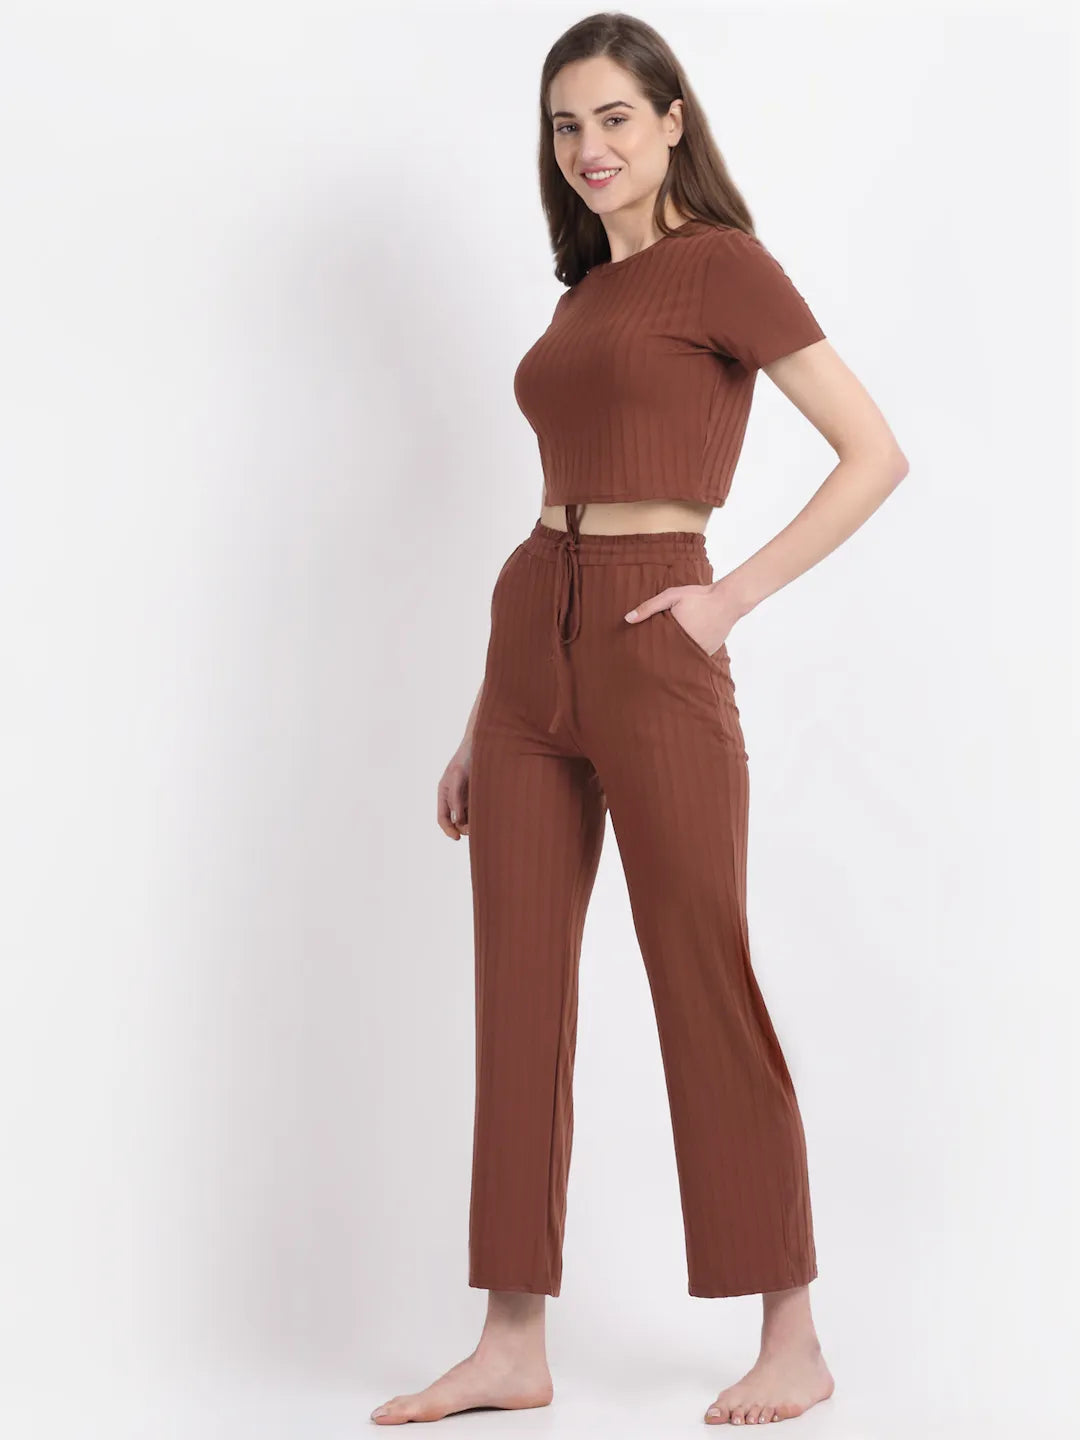 Women Brown Cotton Night Suit and Loungewear (Top and Lower)